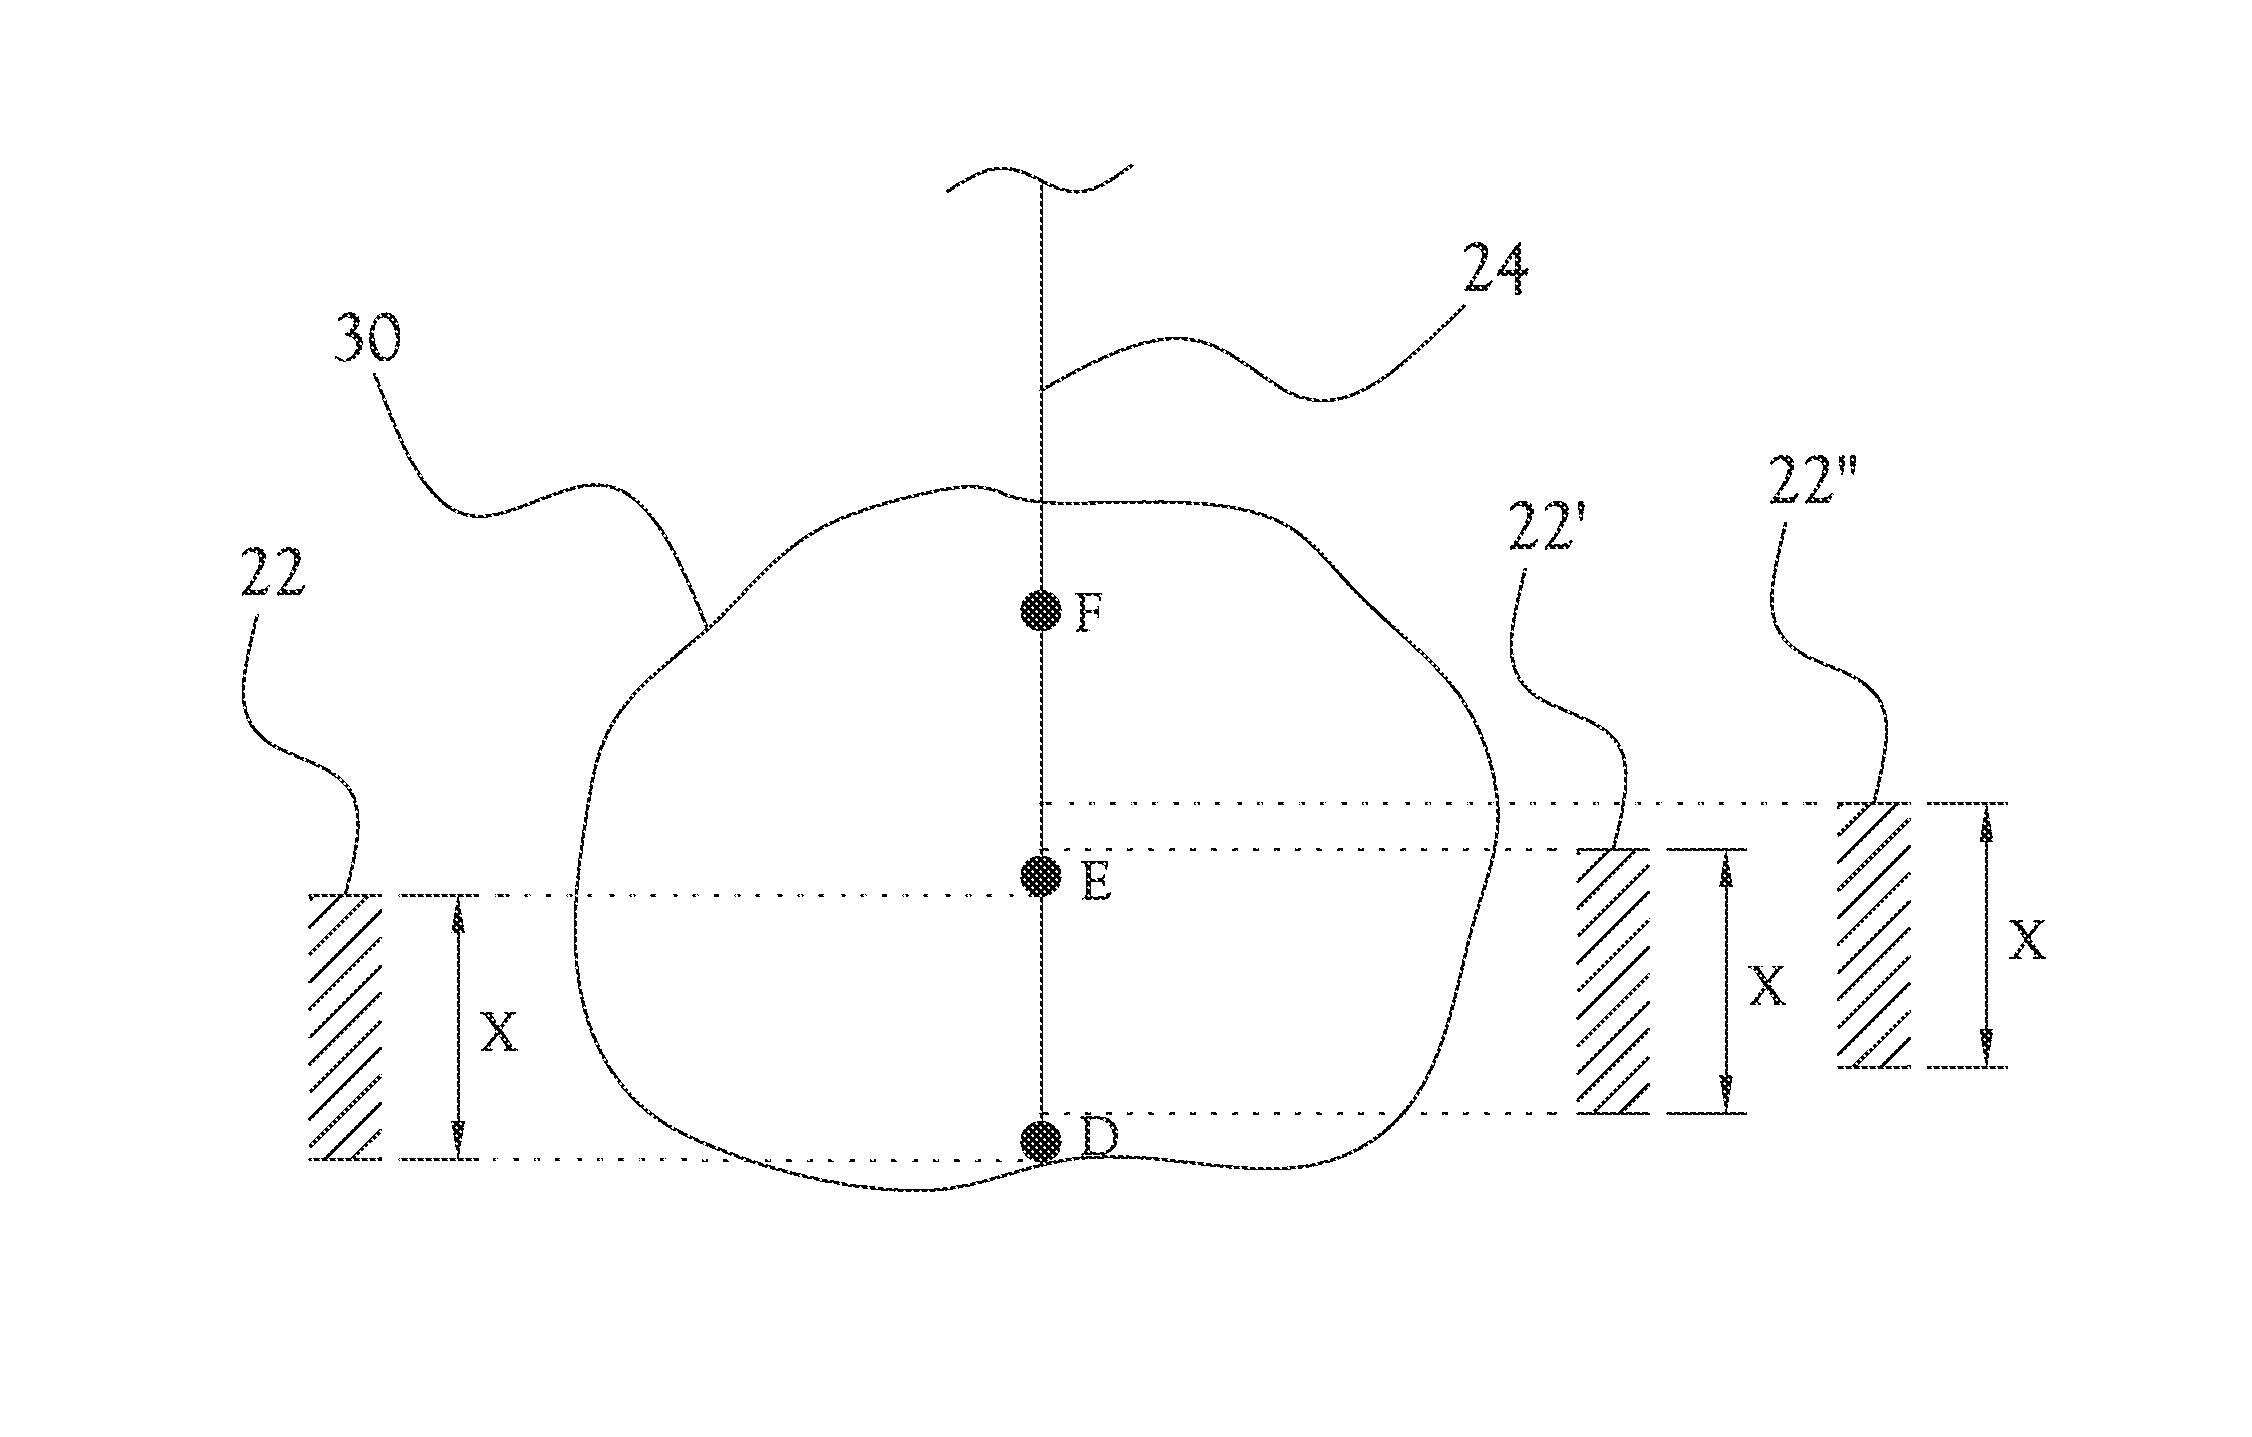 Systems and methods of controlling a proton beam of a proton treatment system